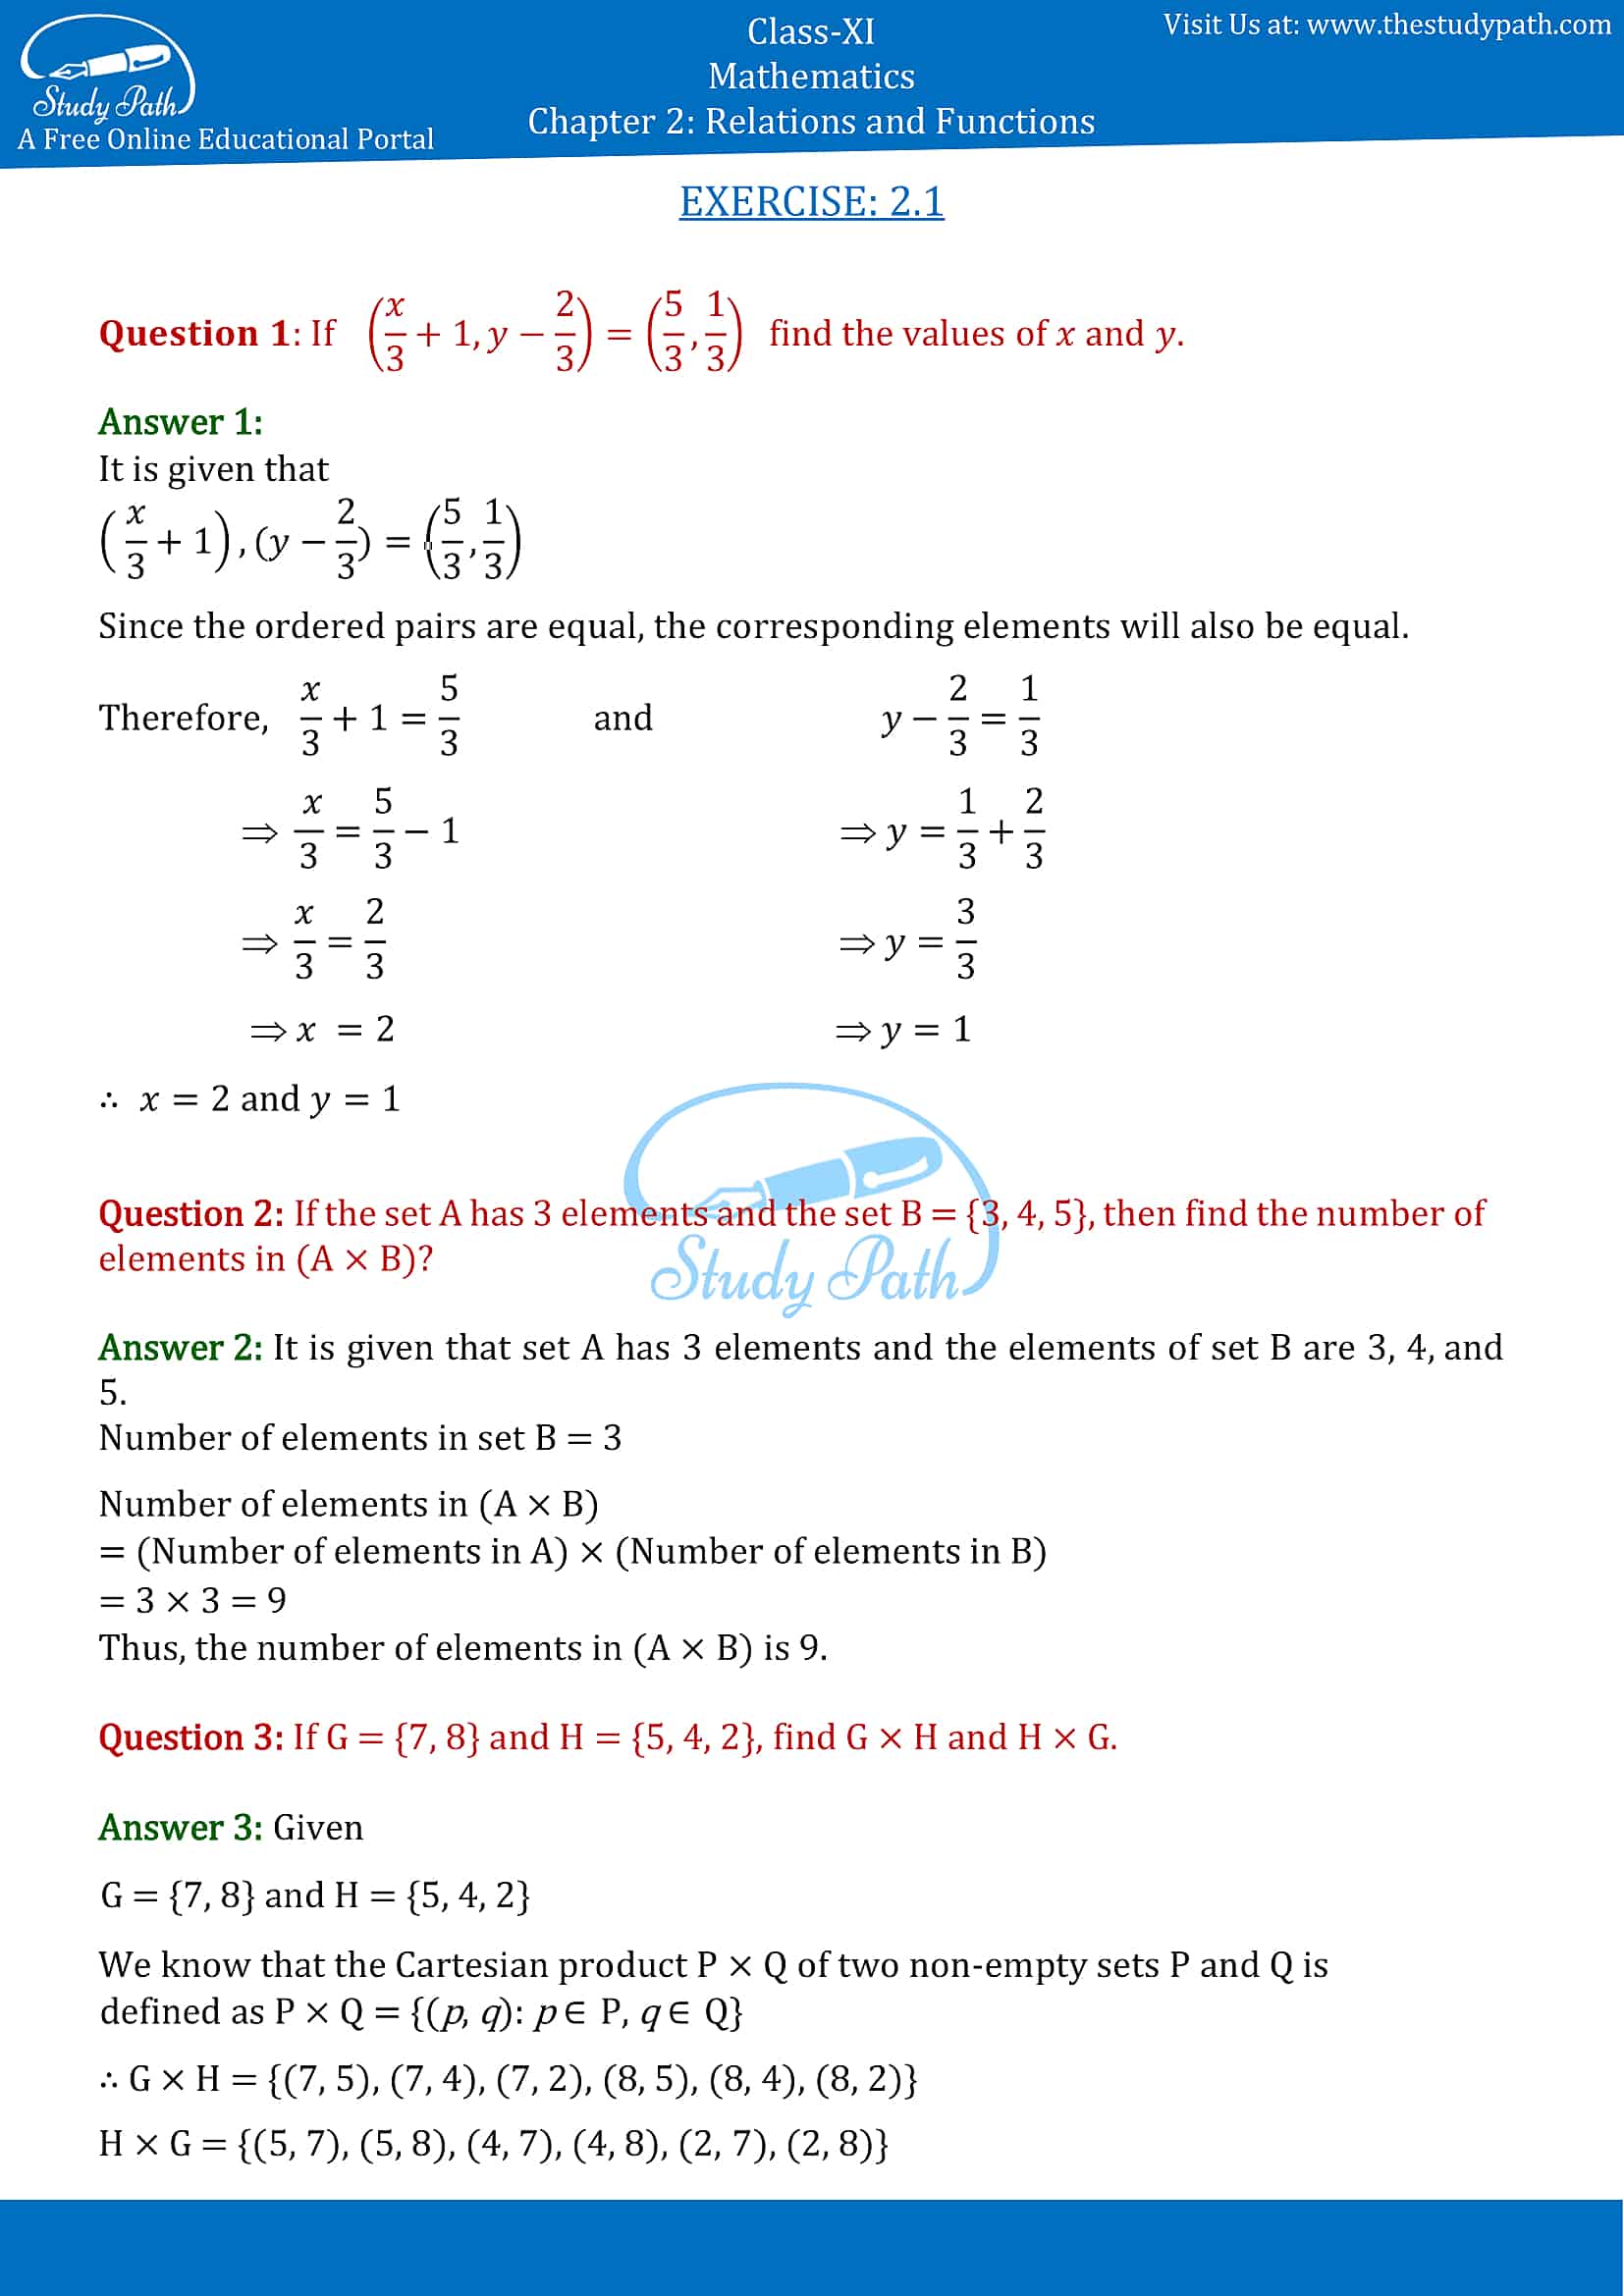 NCERT Solutions for Class 11 Maths Chapter 2 Relations and Functions Exercise 2.1